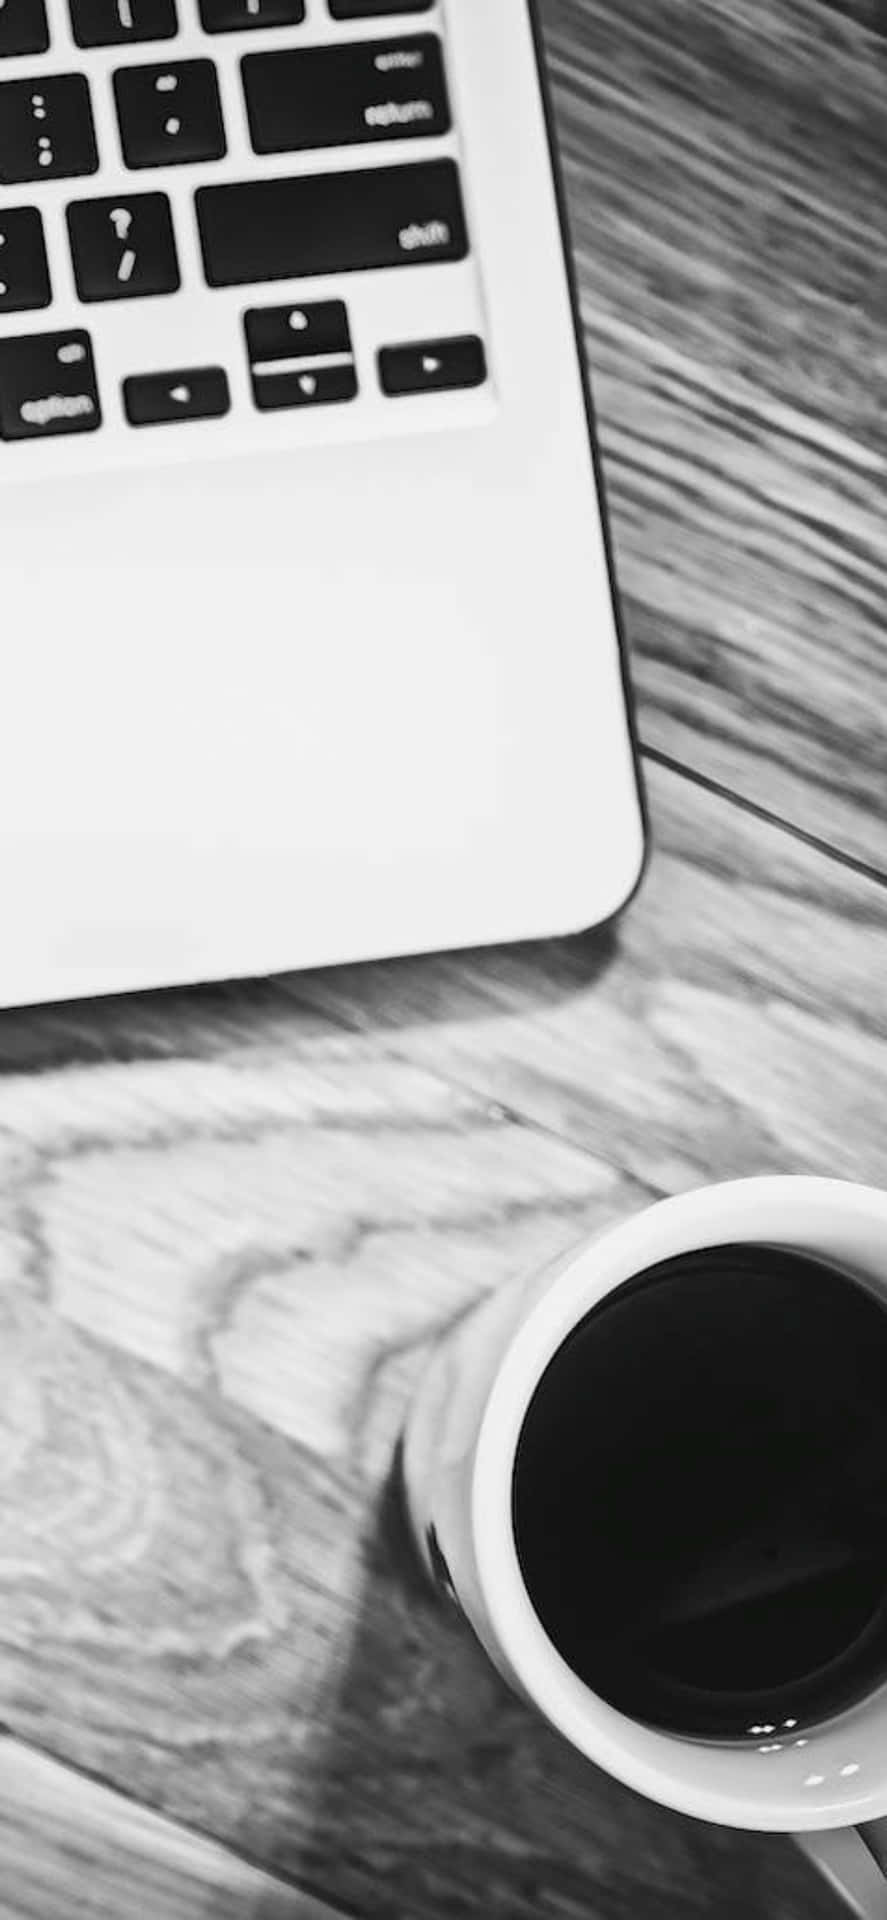 Iphone X Desk Background Black And White Photo With Cup Laptop